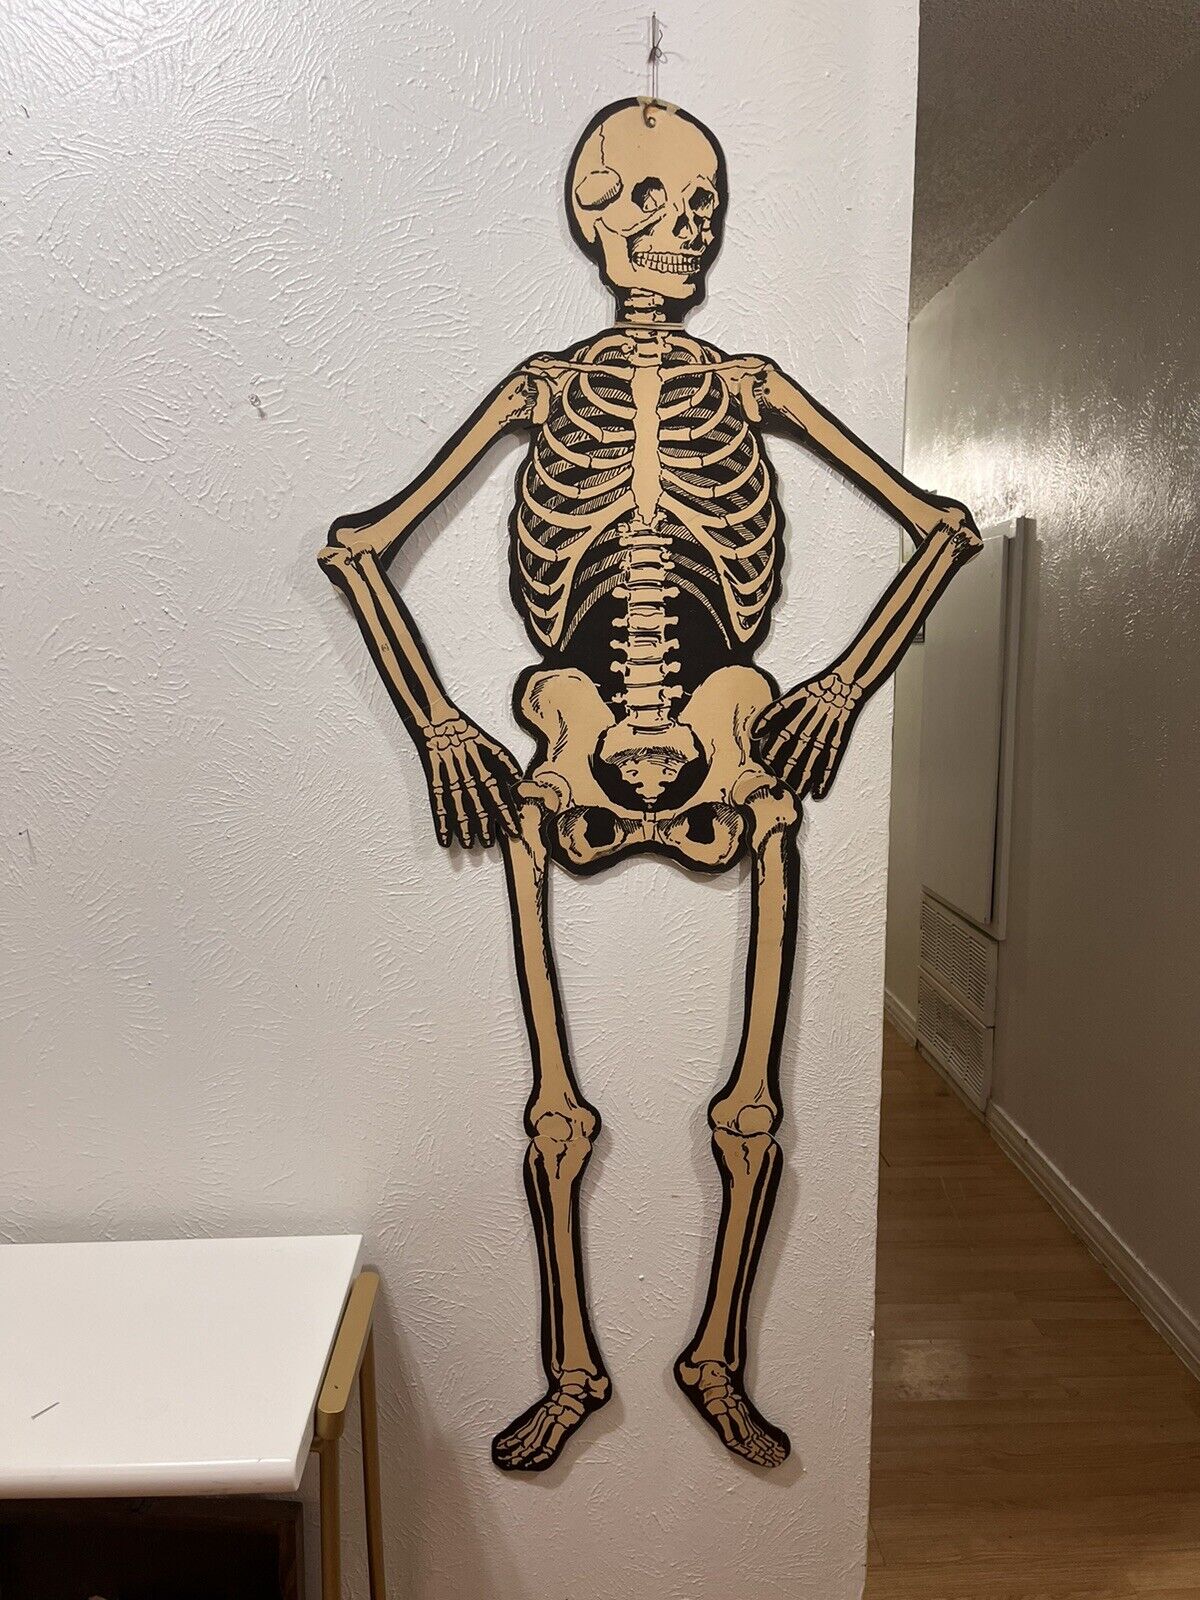 1930s/1940s Vintage Halloween Decorations; 55” Moveable Skeleton